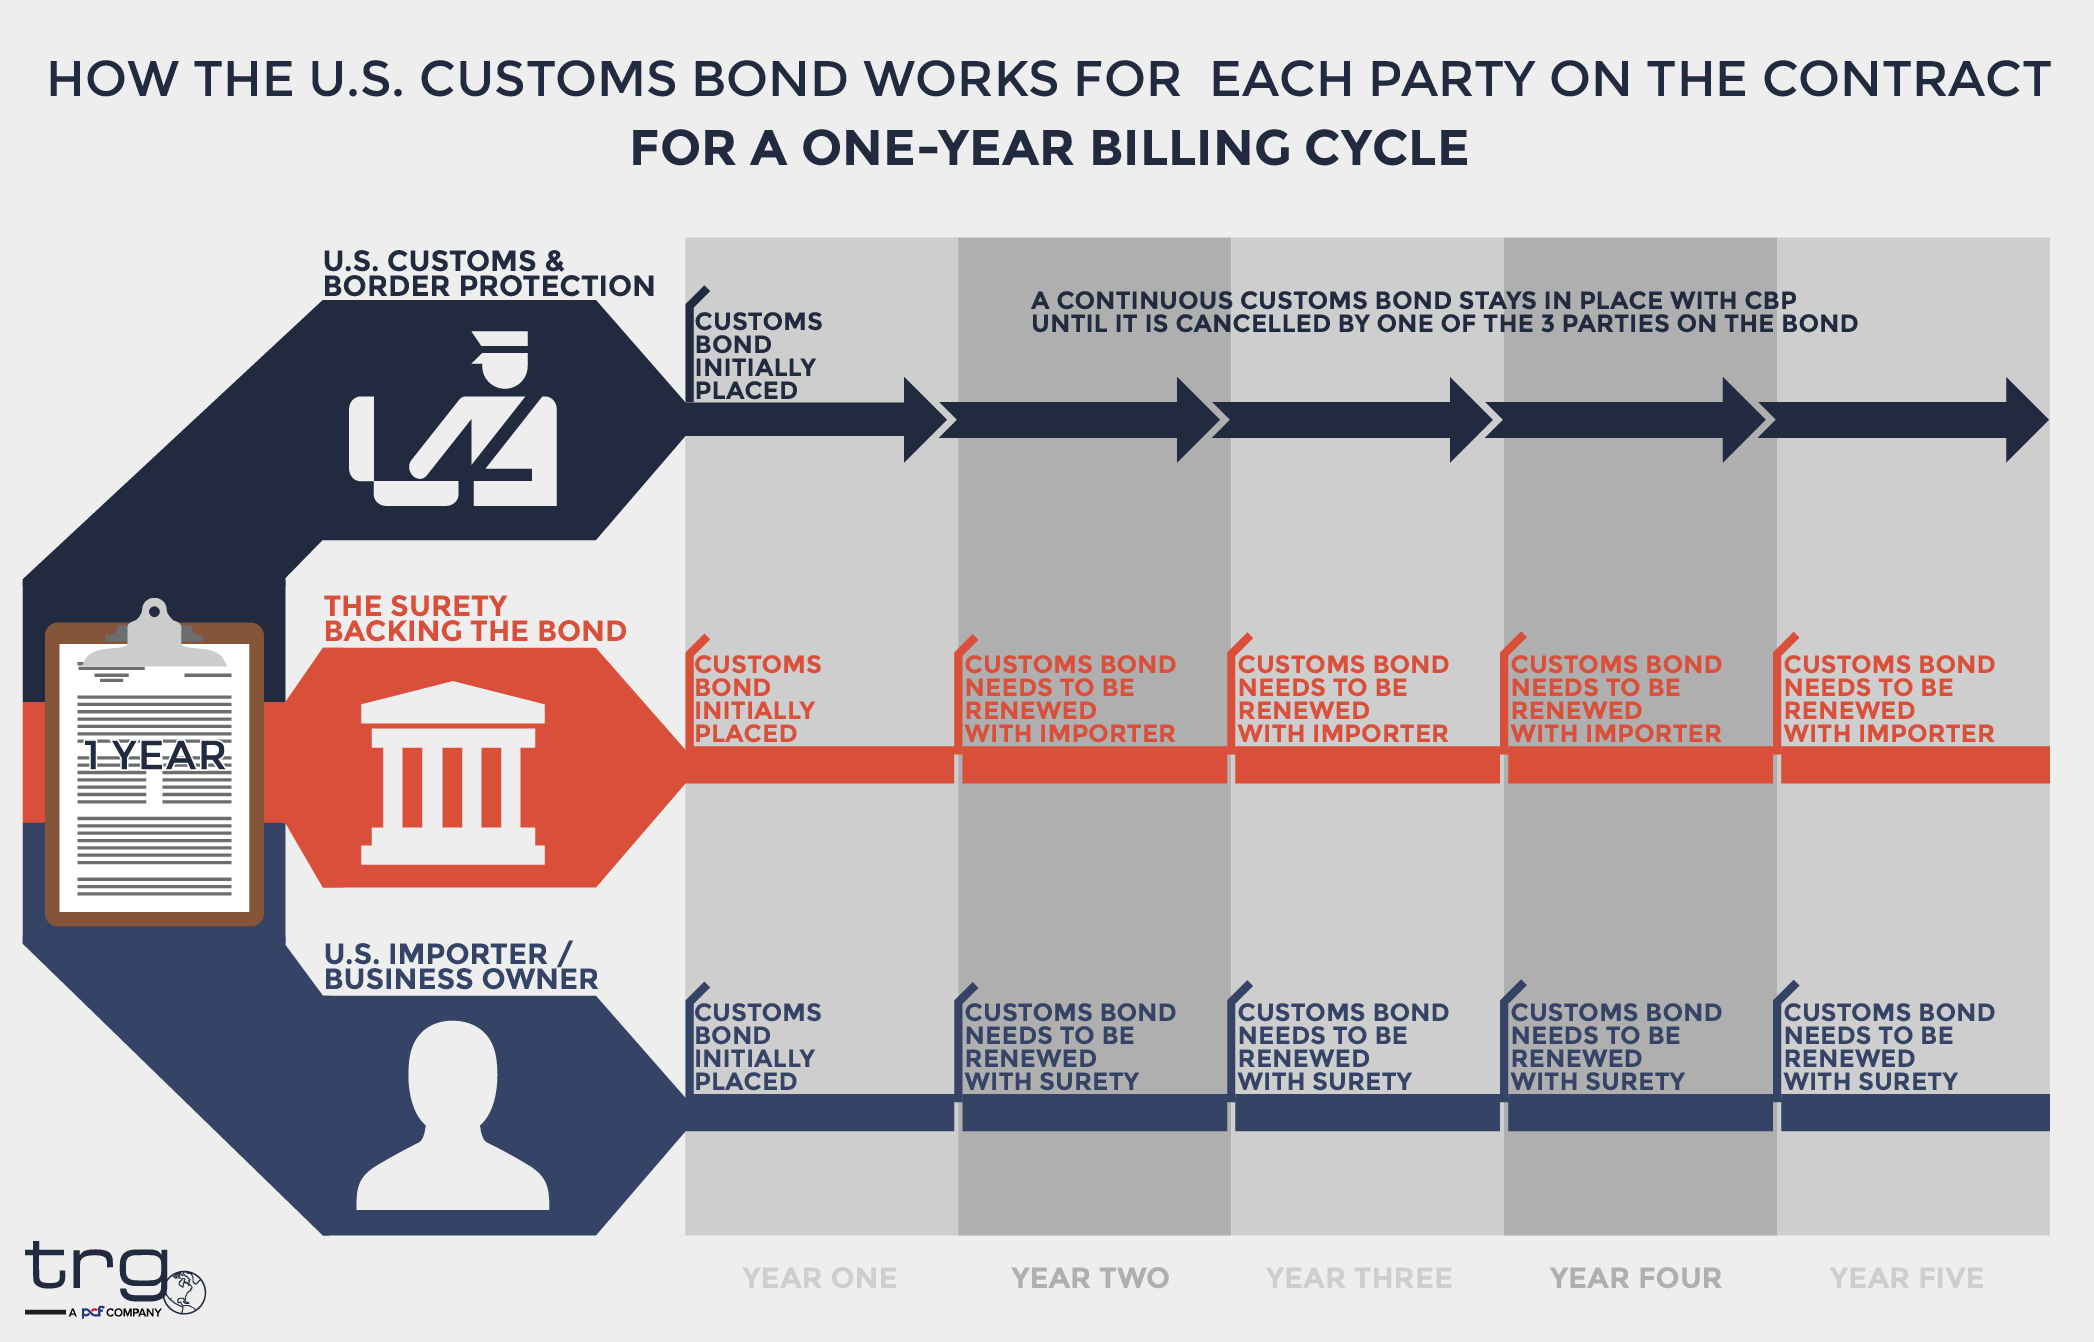 How the U.S. Customs bond works for each party on the contract for a 1-year billing cycle.